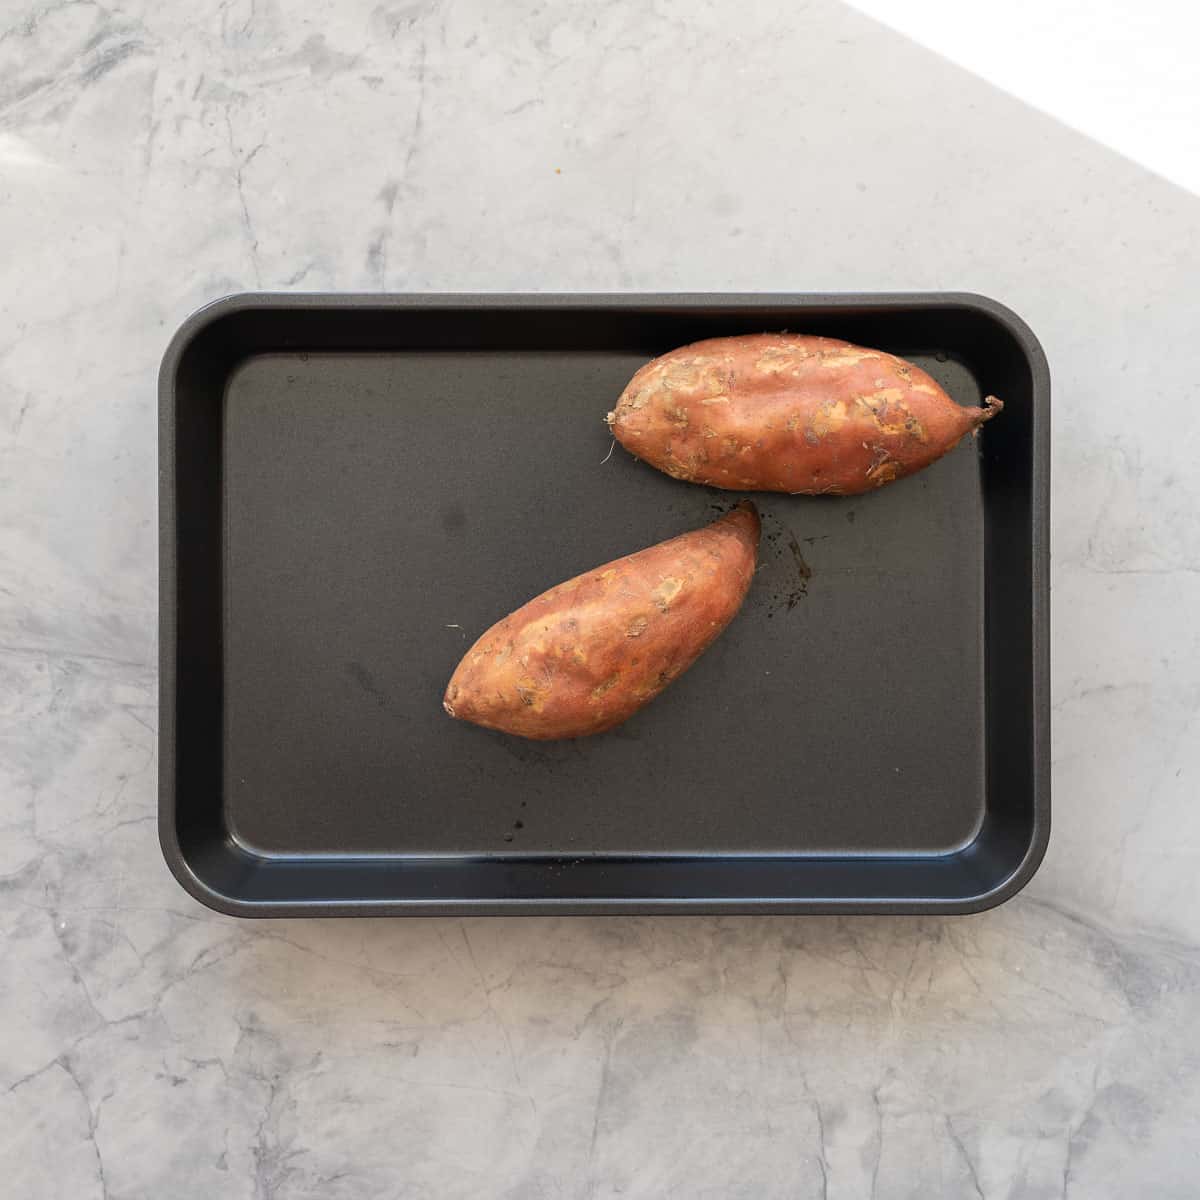 Two raw whole sweet potatoes on a baking tray.